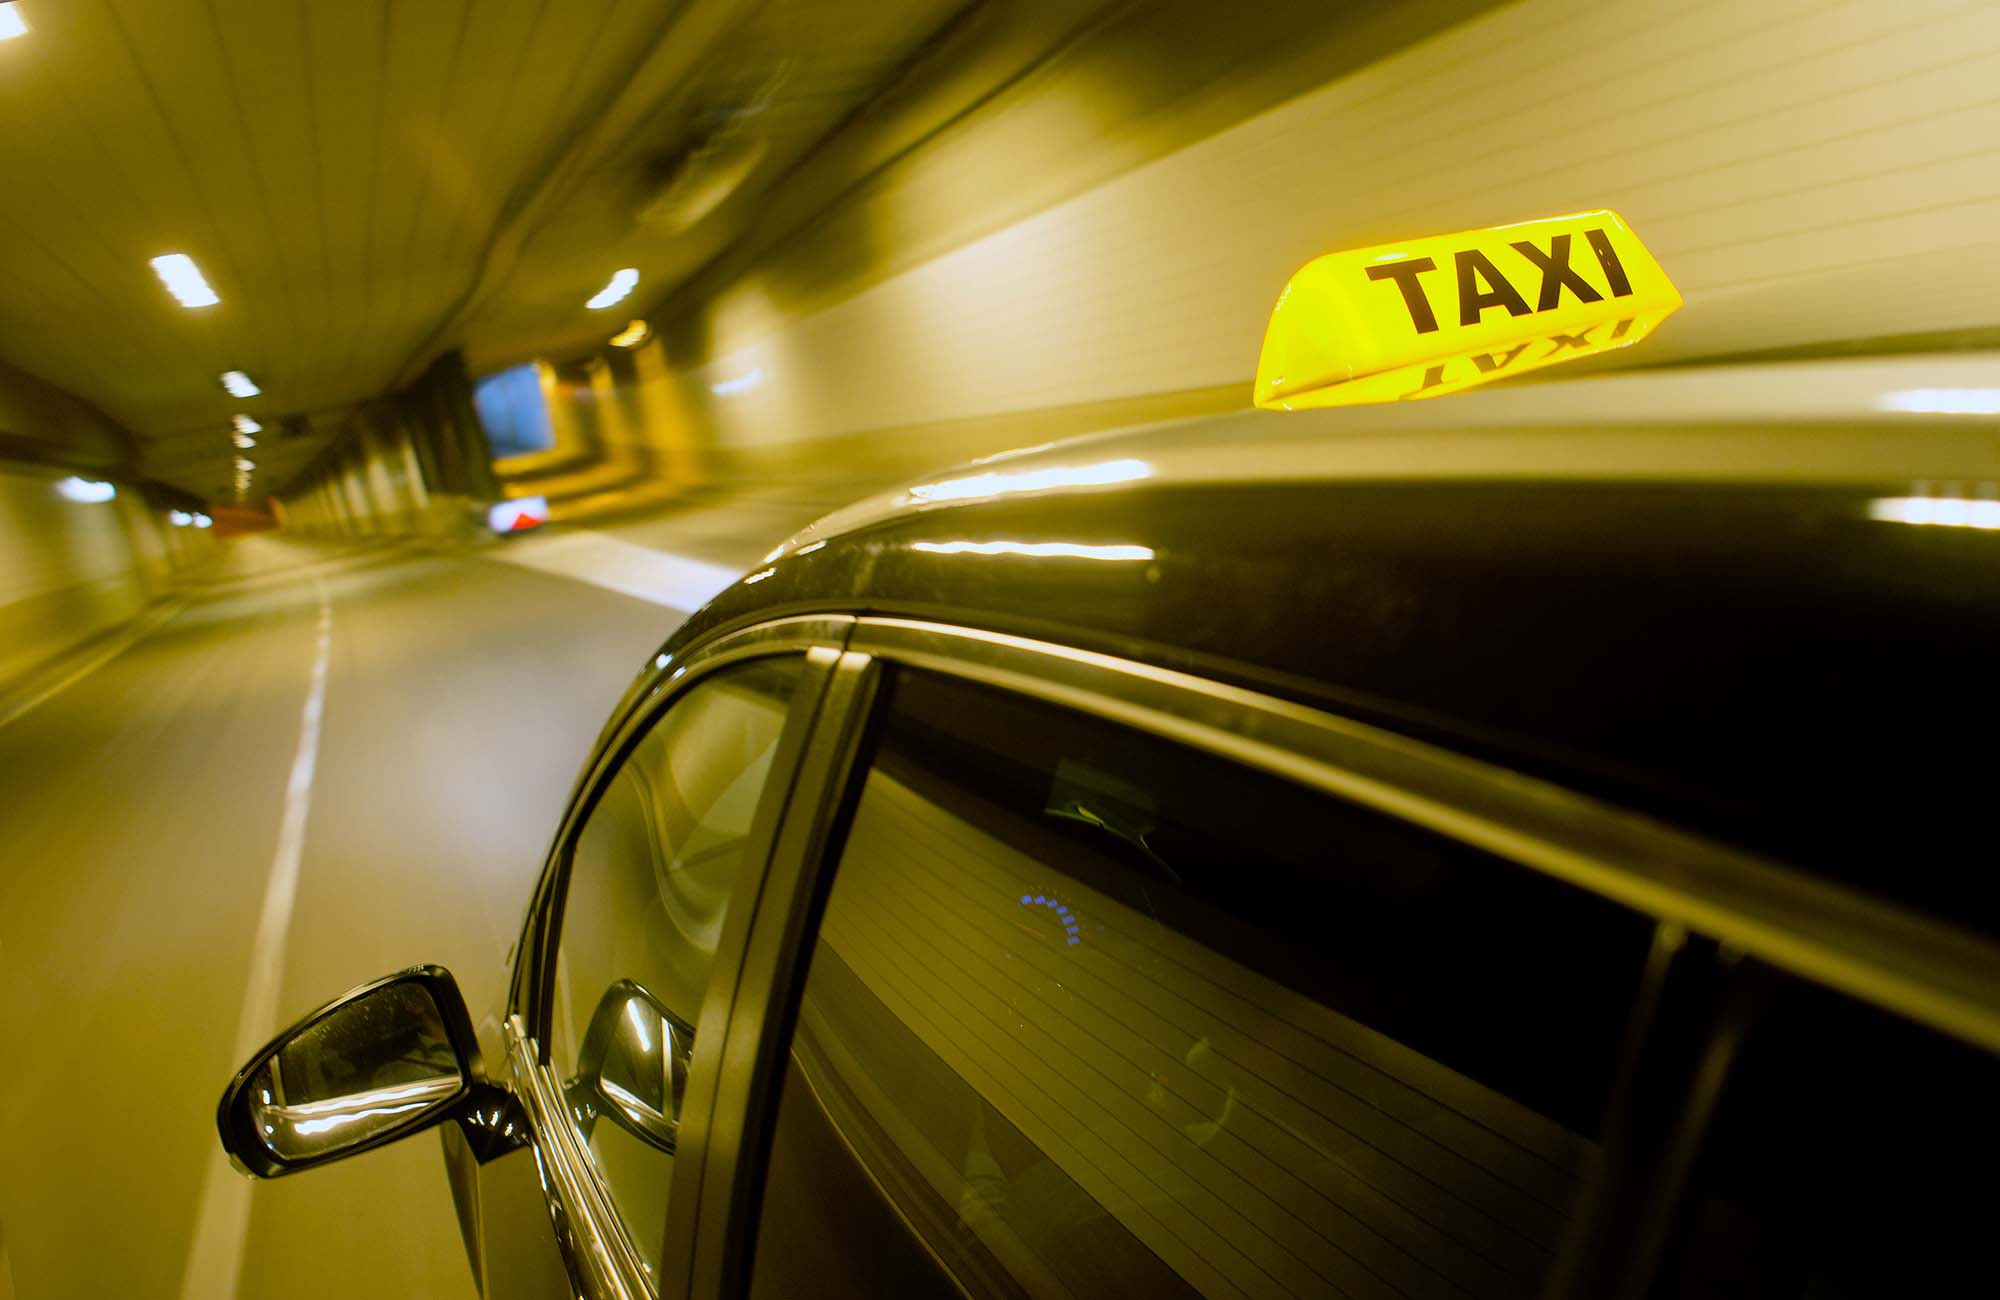 A black taxi, driving through a dunnel, with the taxi sign lit, apporaching a junction and exit ramp